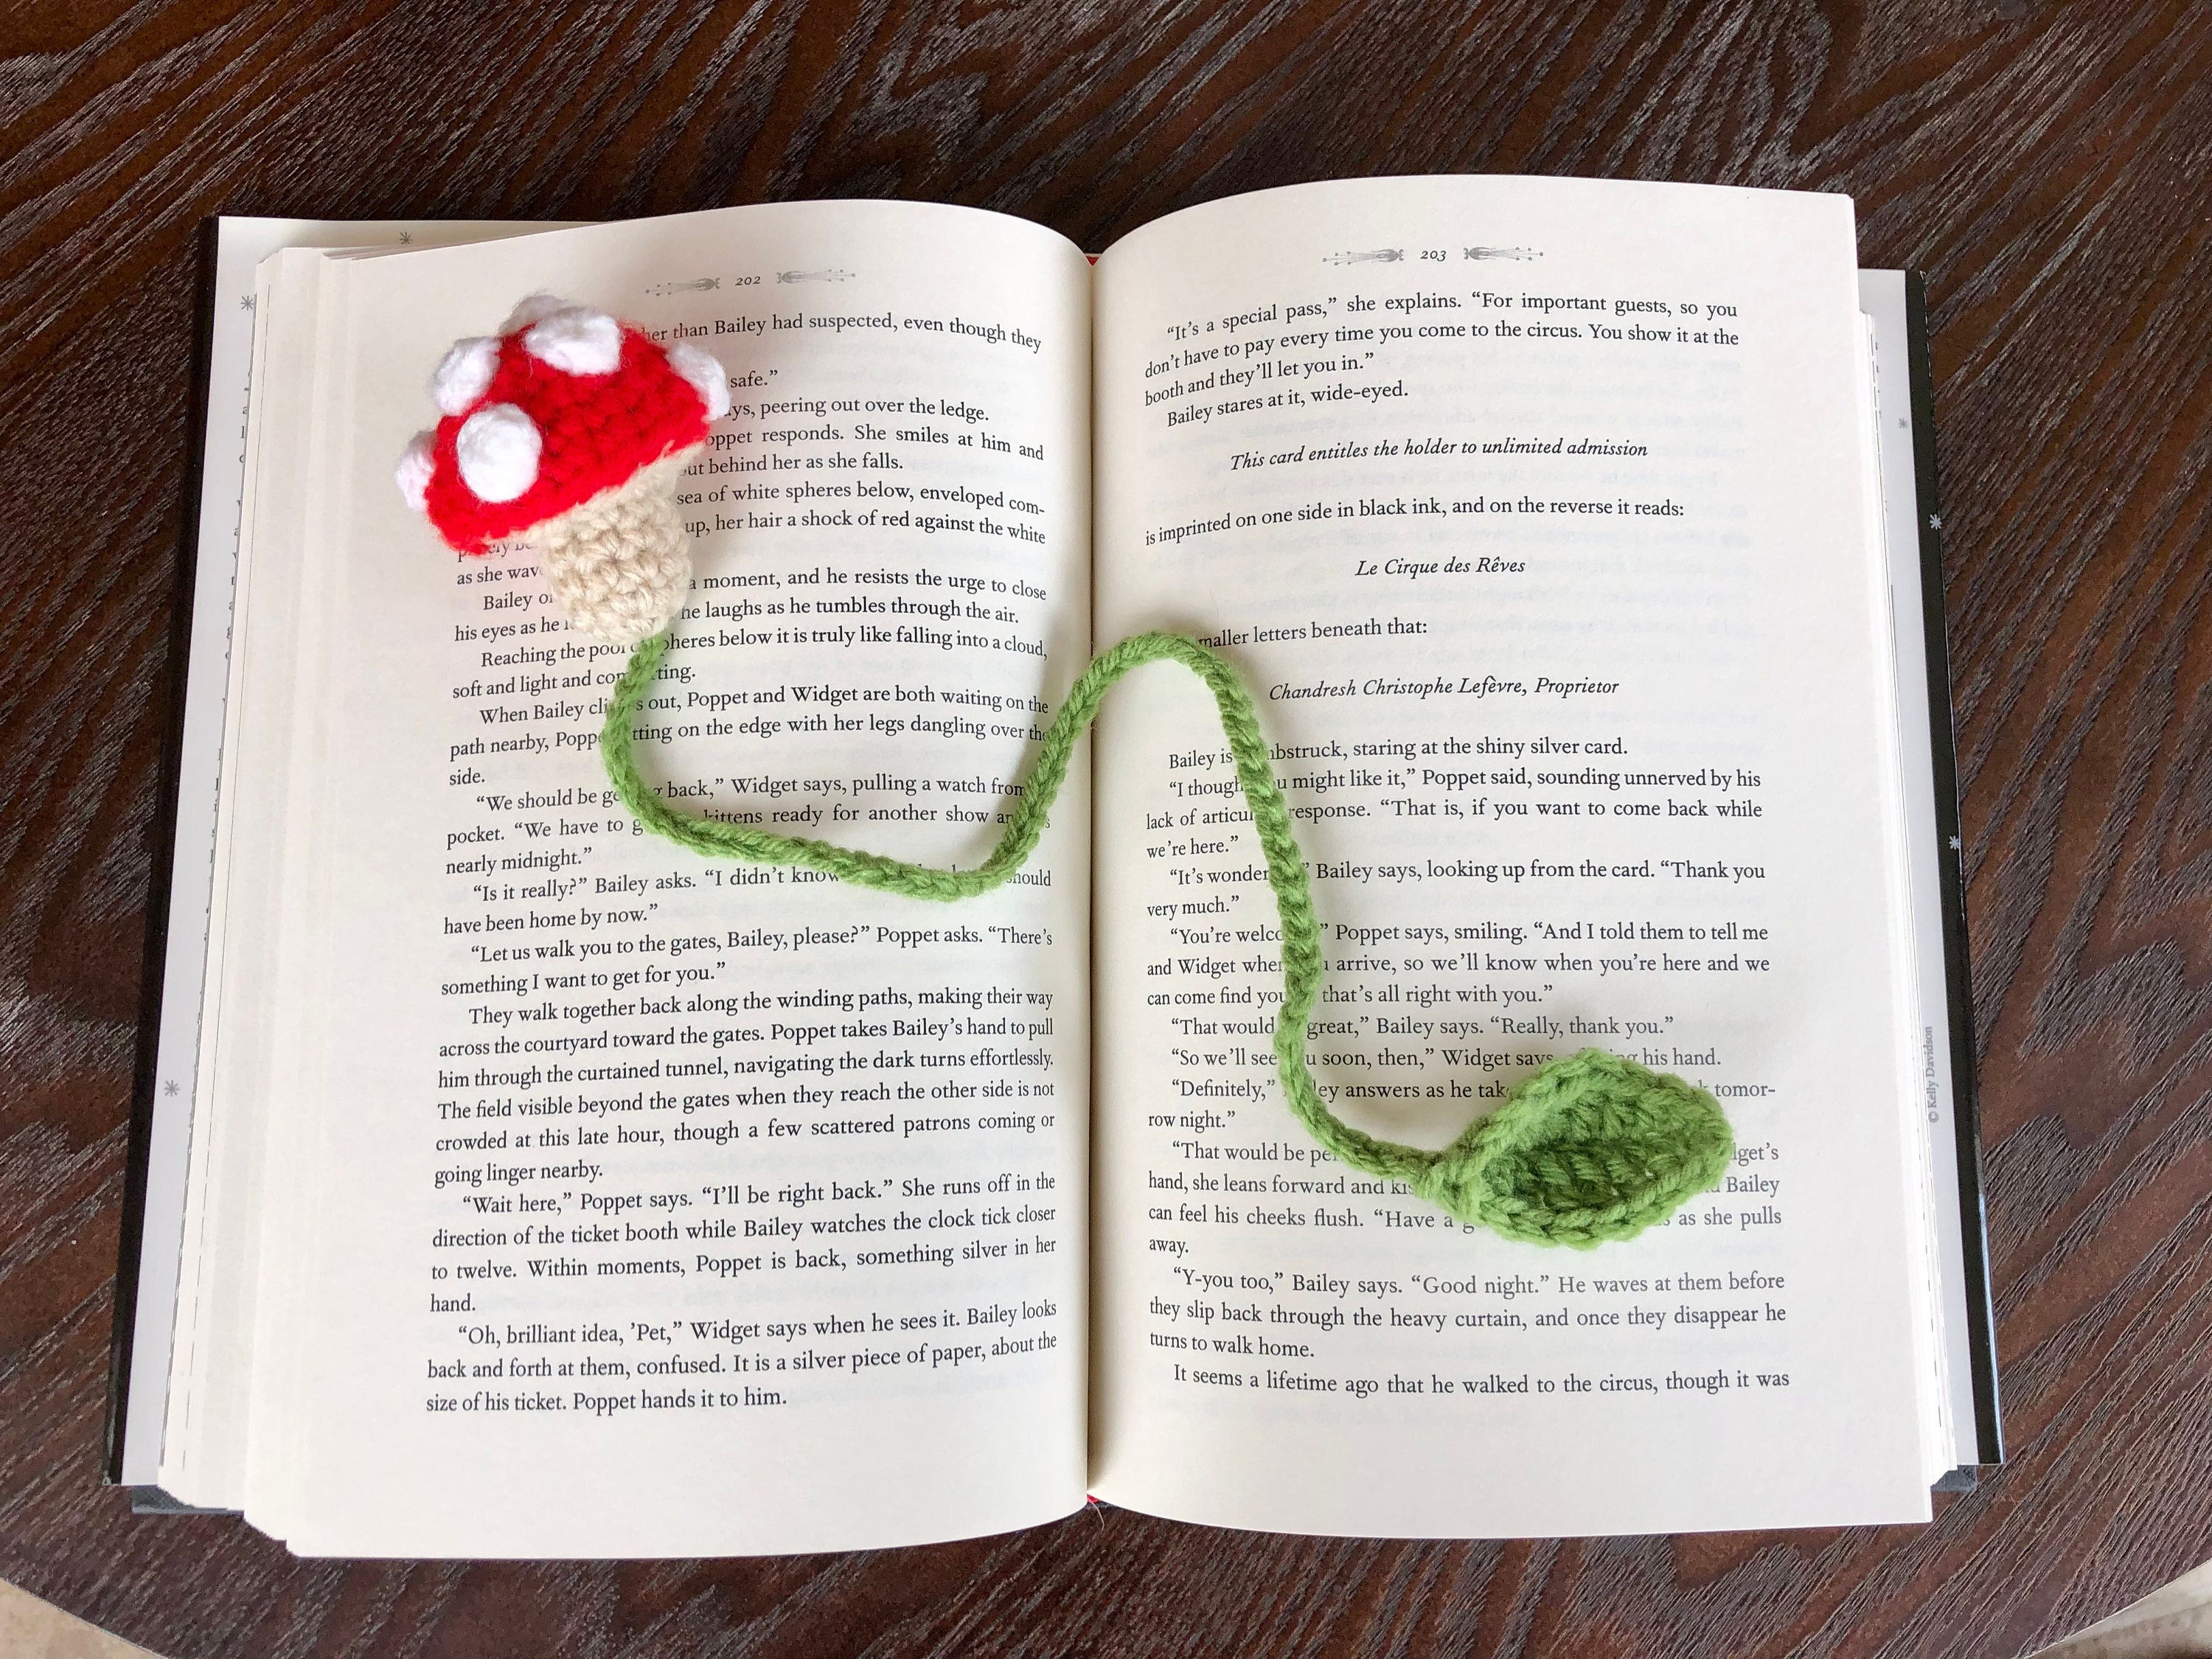 Mushroom and Leaf Bookmark pattern by Lily White